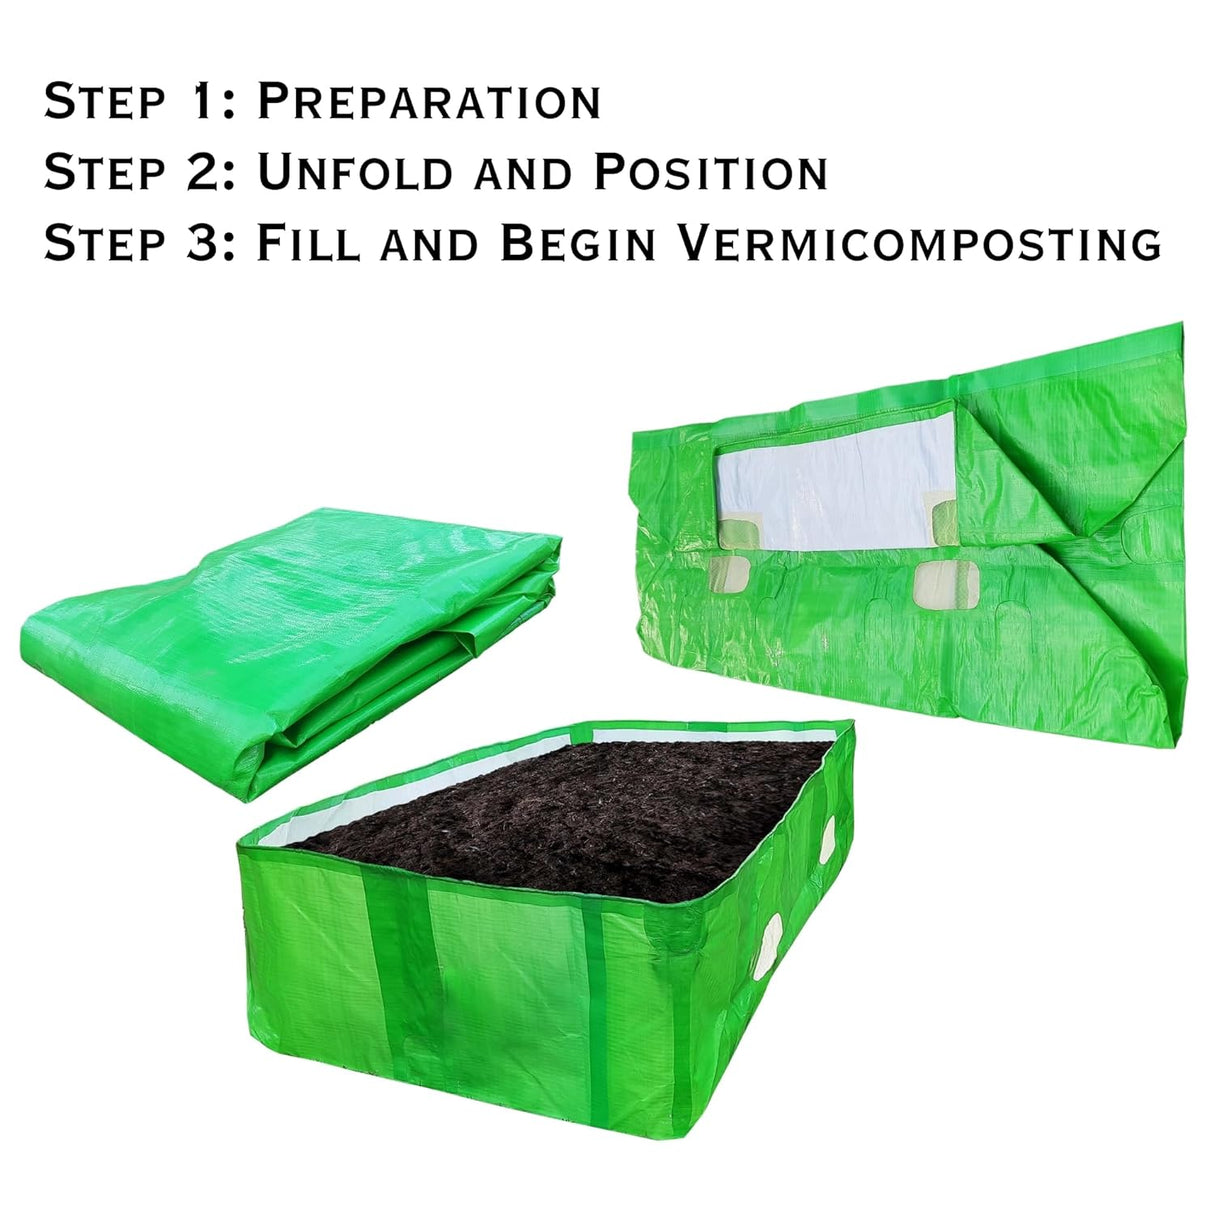 Singhal HDPE UV Stabilized Vermi Compost Bed 400 GSM, 8x4x2 Ft, 100% Virgin Quality Material, Green and White, Vermibed Agro Vermicompost Bed (Vermi Bed), Agro Vermi Compost Making Bed